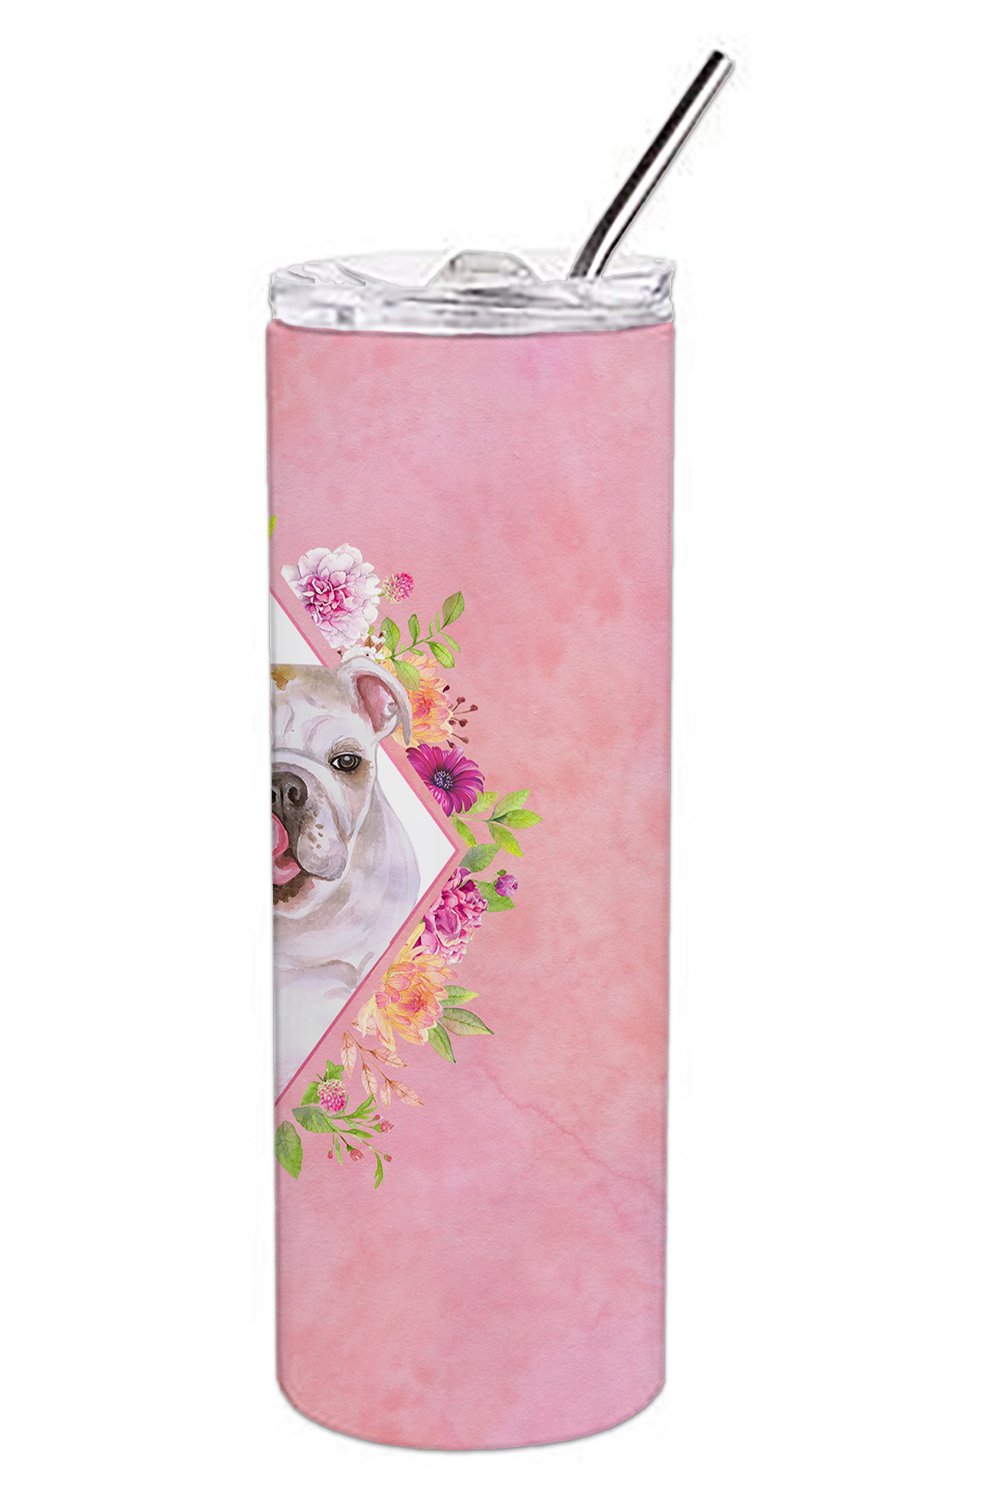 English Bulldog Pink Flowers Double Walled Stainless Steel 20 oz Skinny Tumbler CK4140TBL20 by Caroline's Treasures